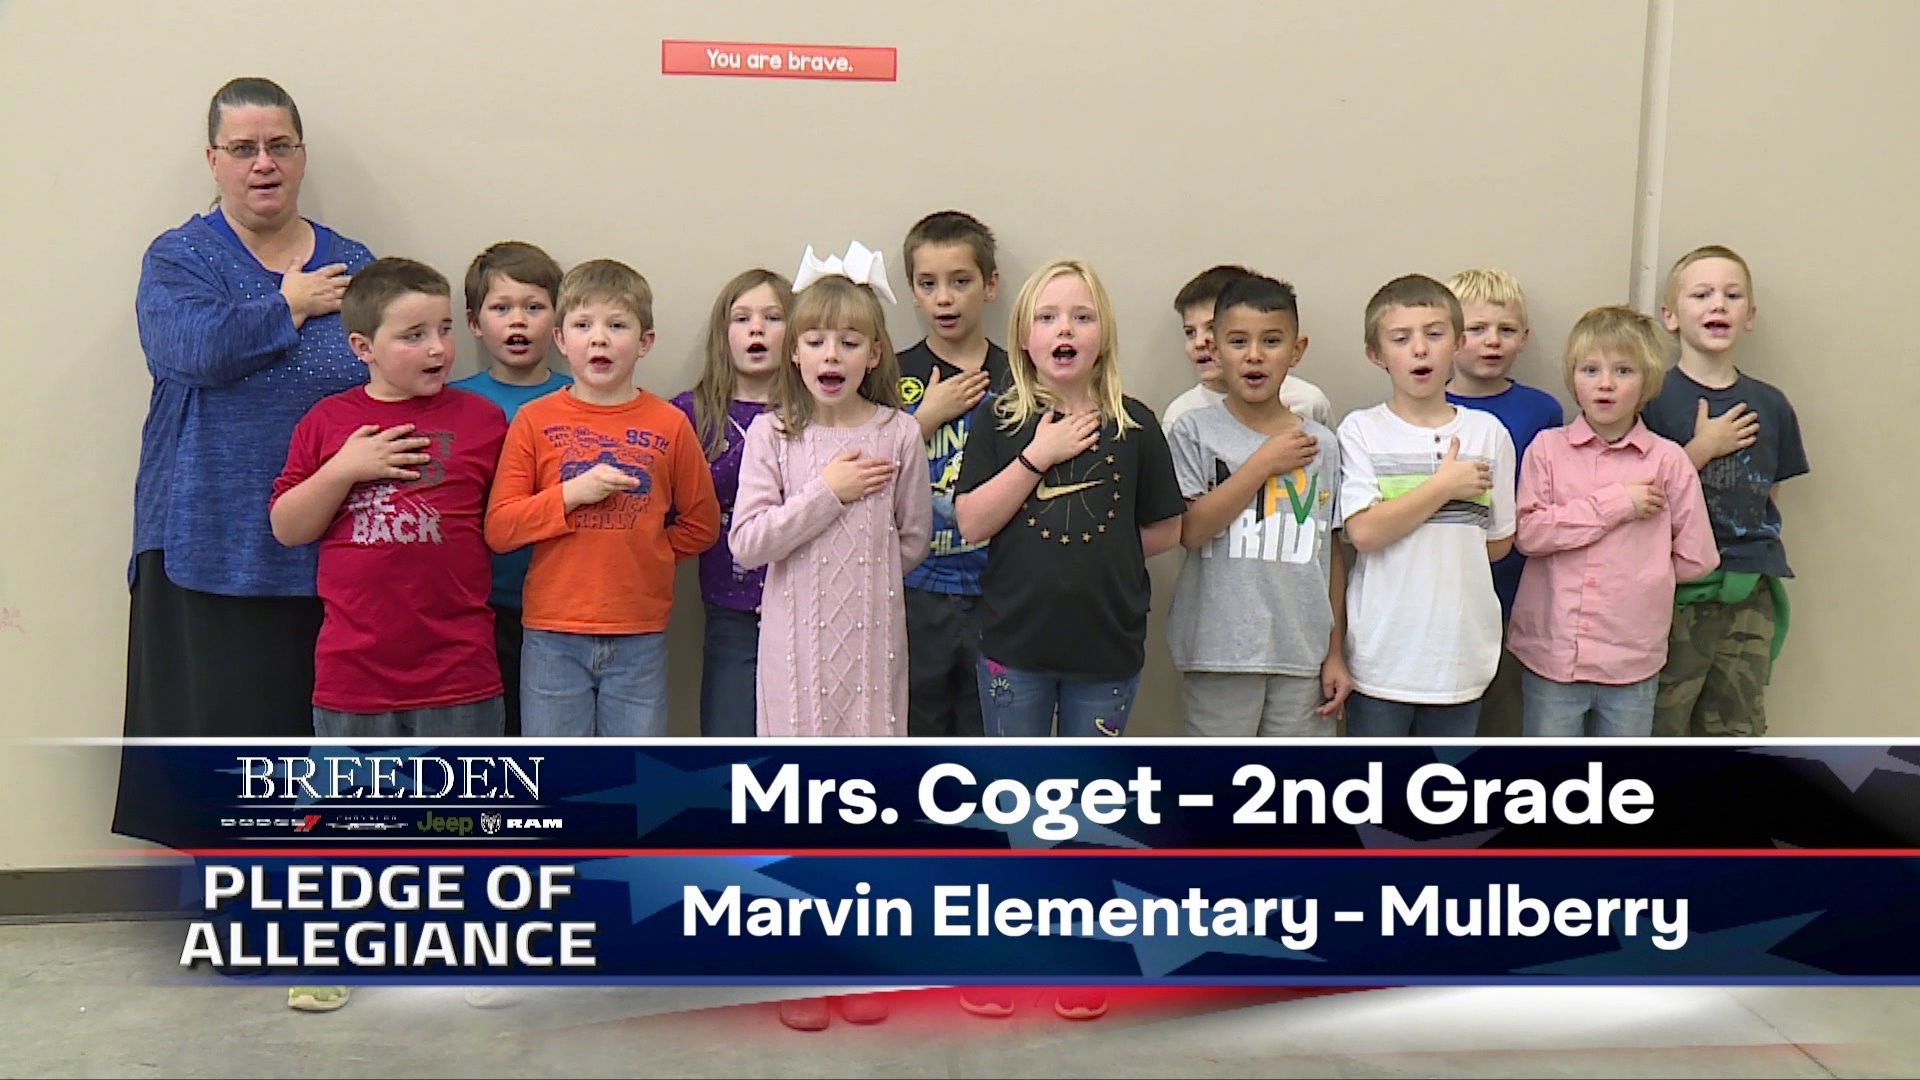 Mrs. Coget 2nd Grade Marvin Elementary, Mulberry